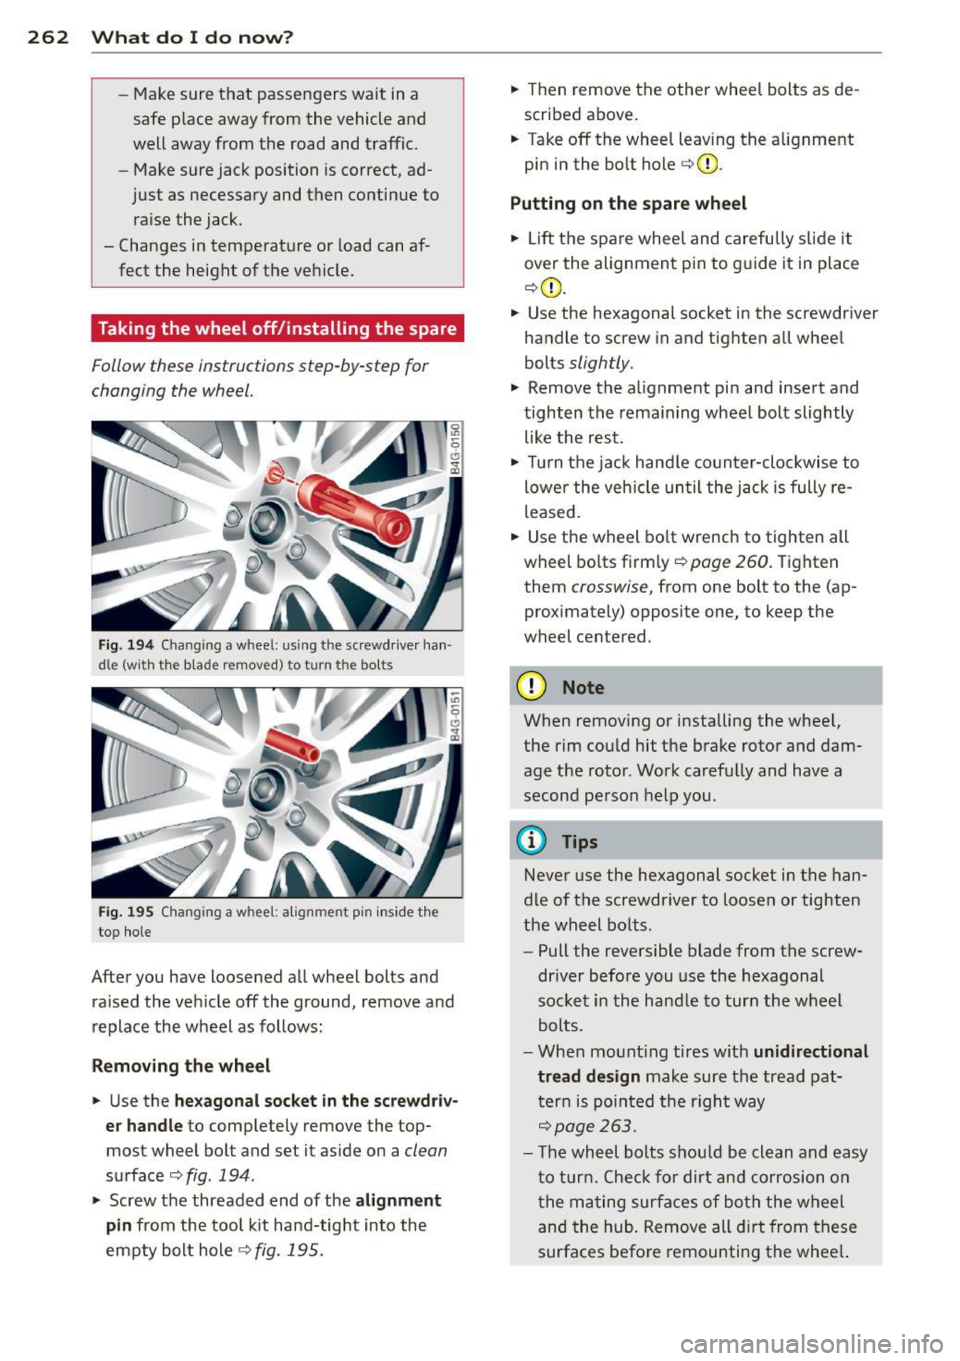 AUDI A6 2012  Owners Manual 262  What  do I do  now ? 
-Make sure  that  passengers  wait  in a 
safe  p lace  away from  the  vehicle  and 
well  away from  the  road  and  traffic. 
- Make sure jack  position  is  correct,  ad